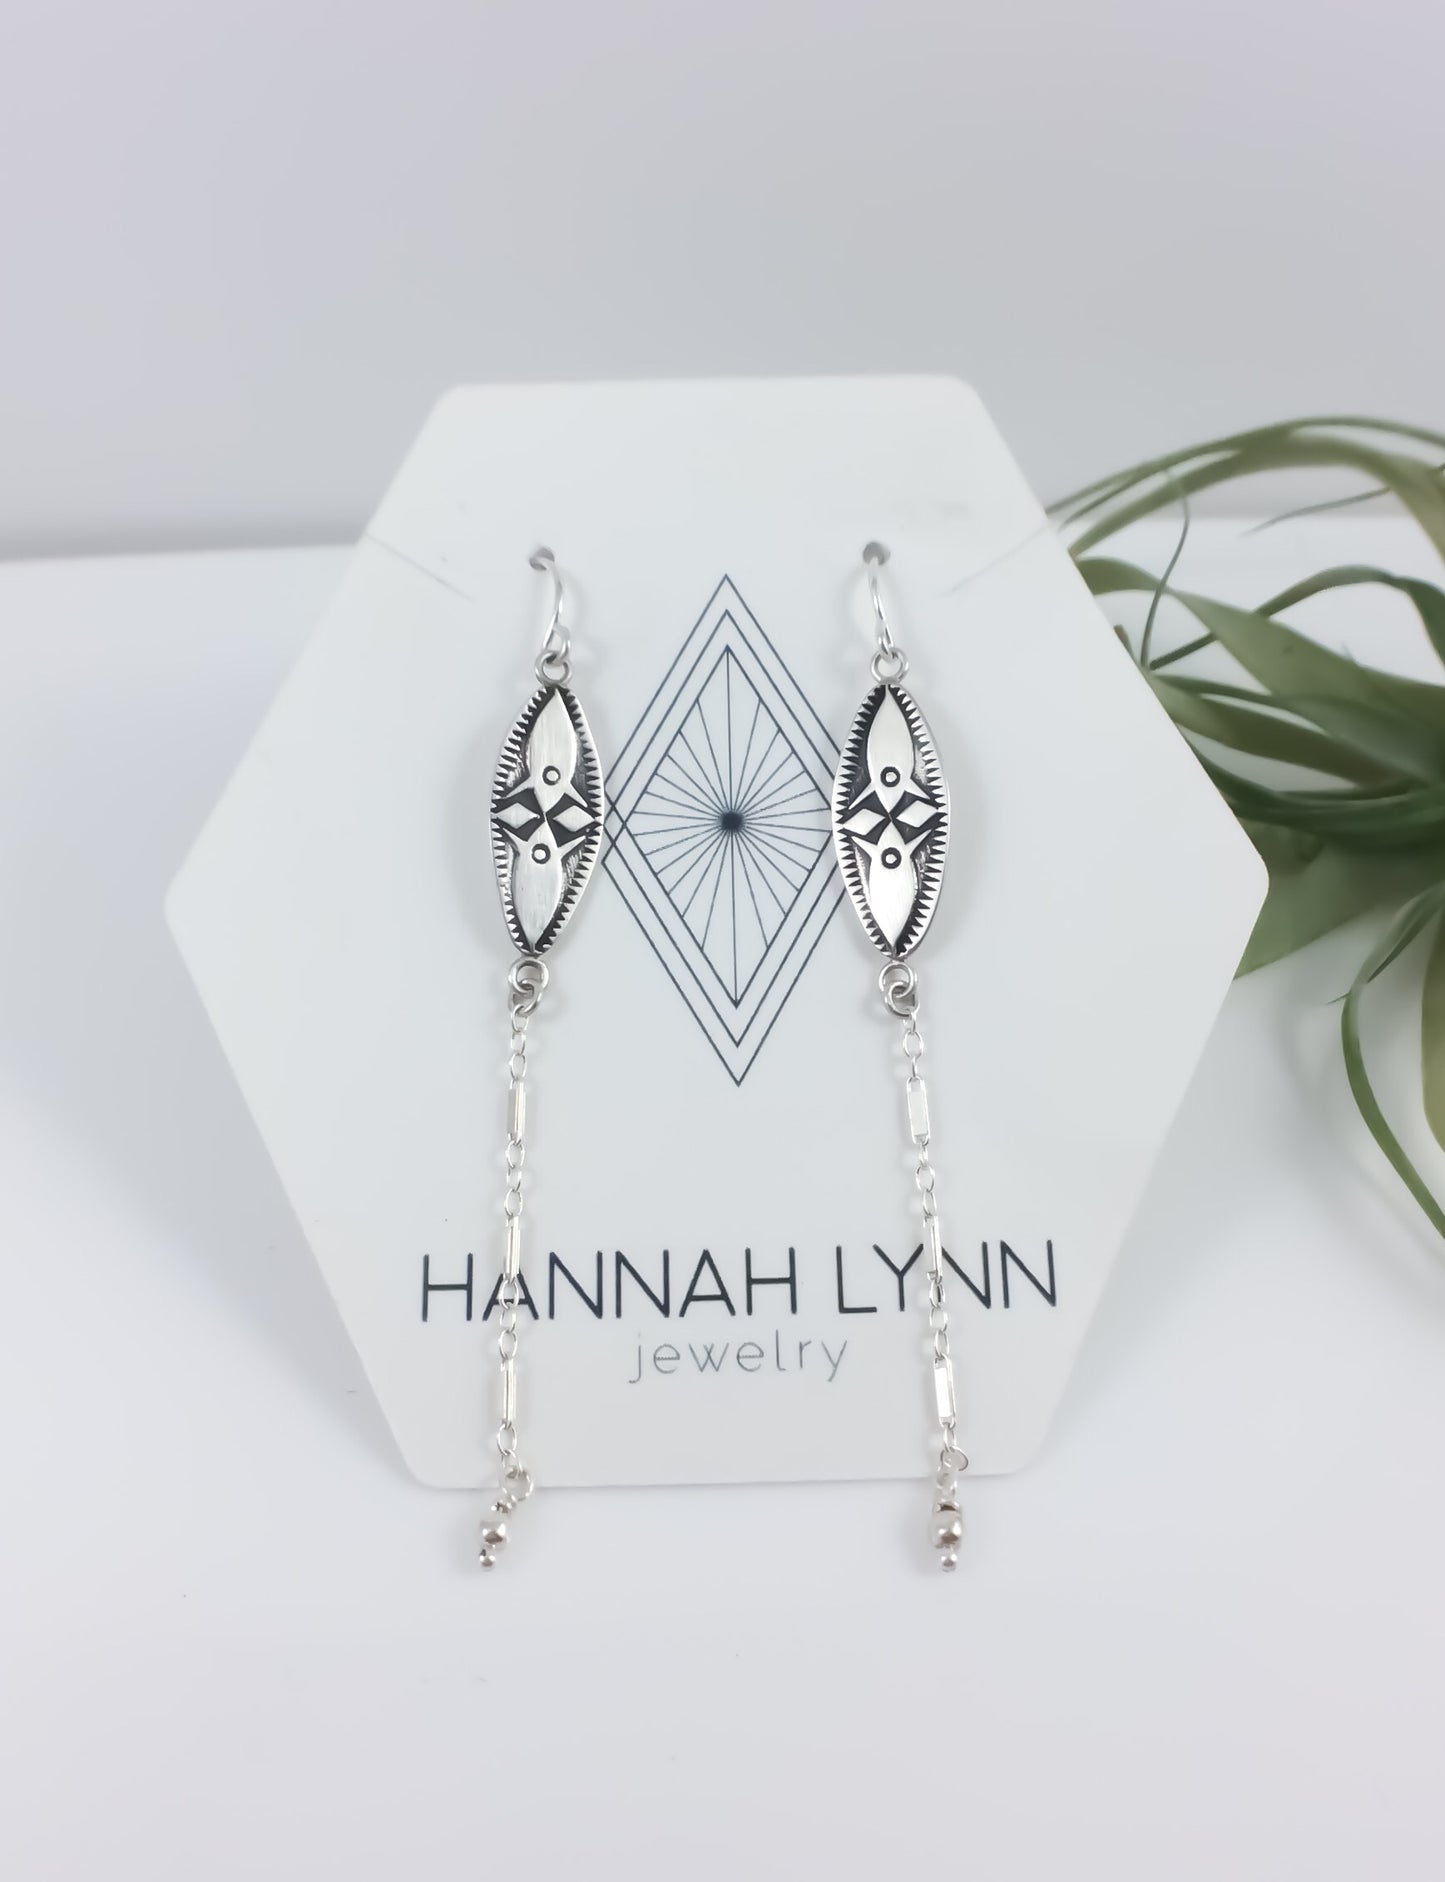 Hand Stamped Southwest Earrings // Diamond Shaped